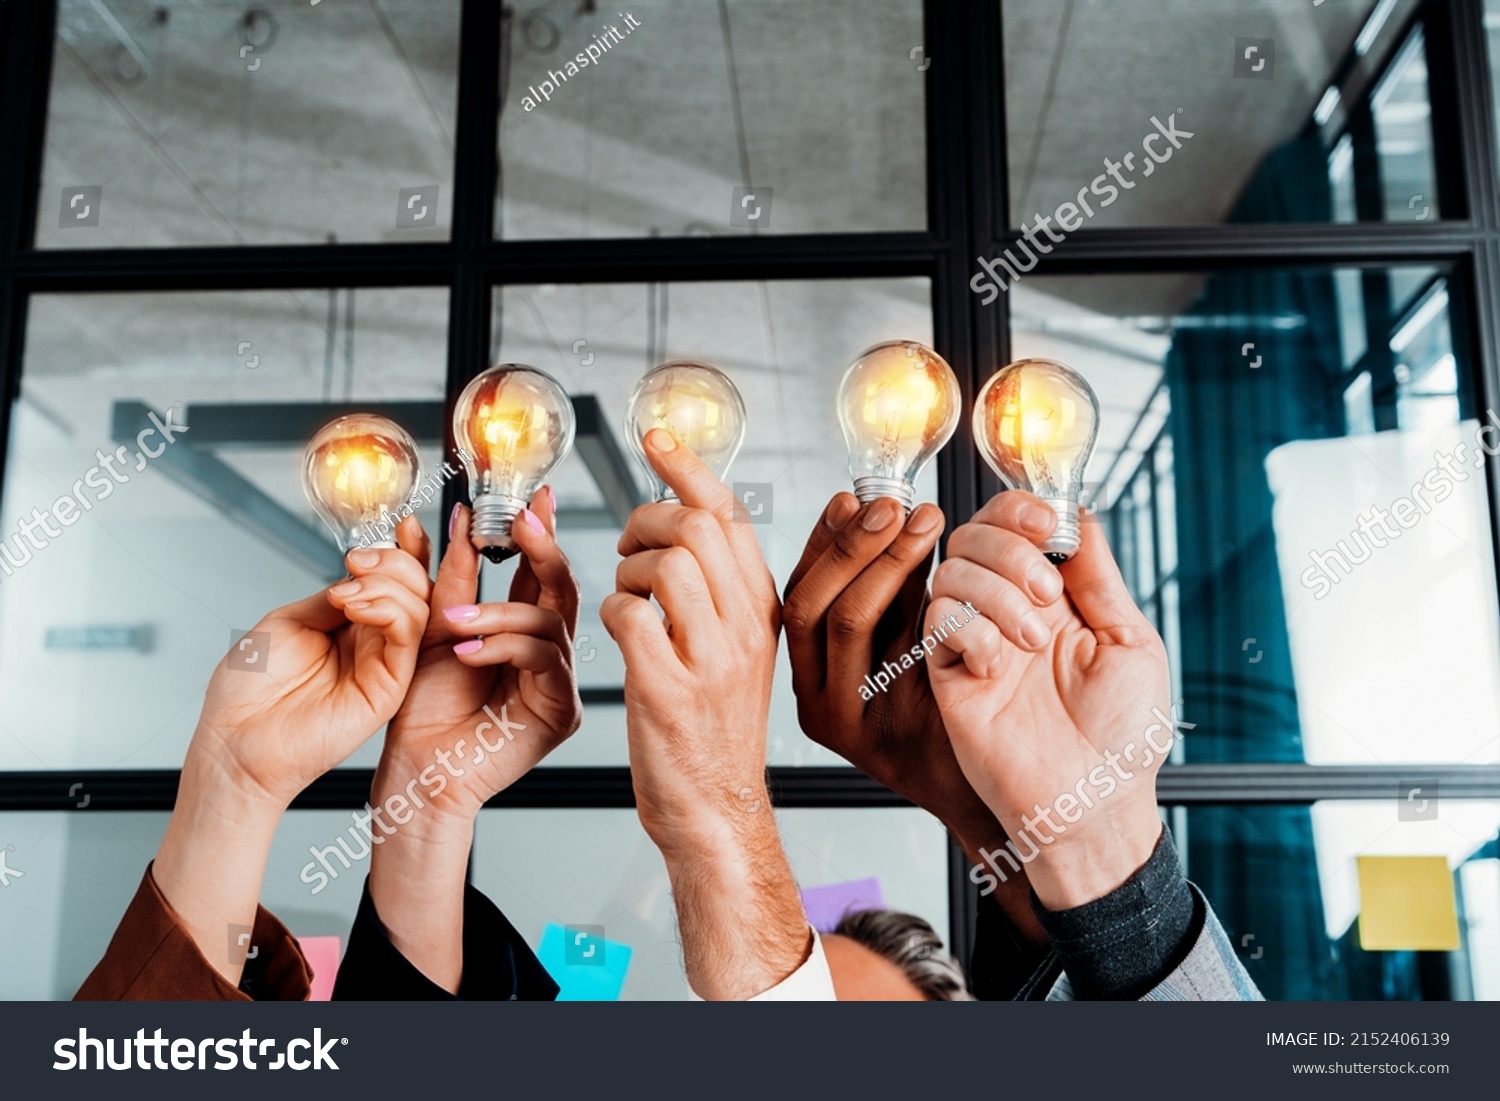 Teamwork and brainstorming concept with businessmen that share an idea with a lamp #2152406139